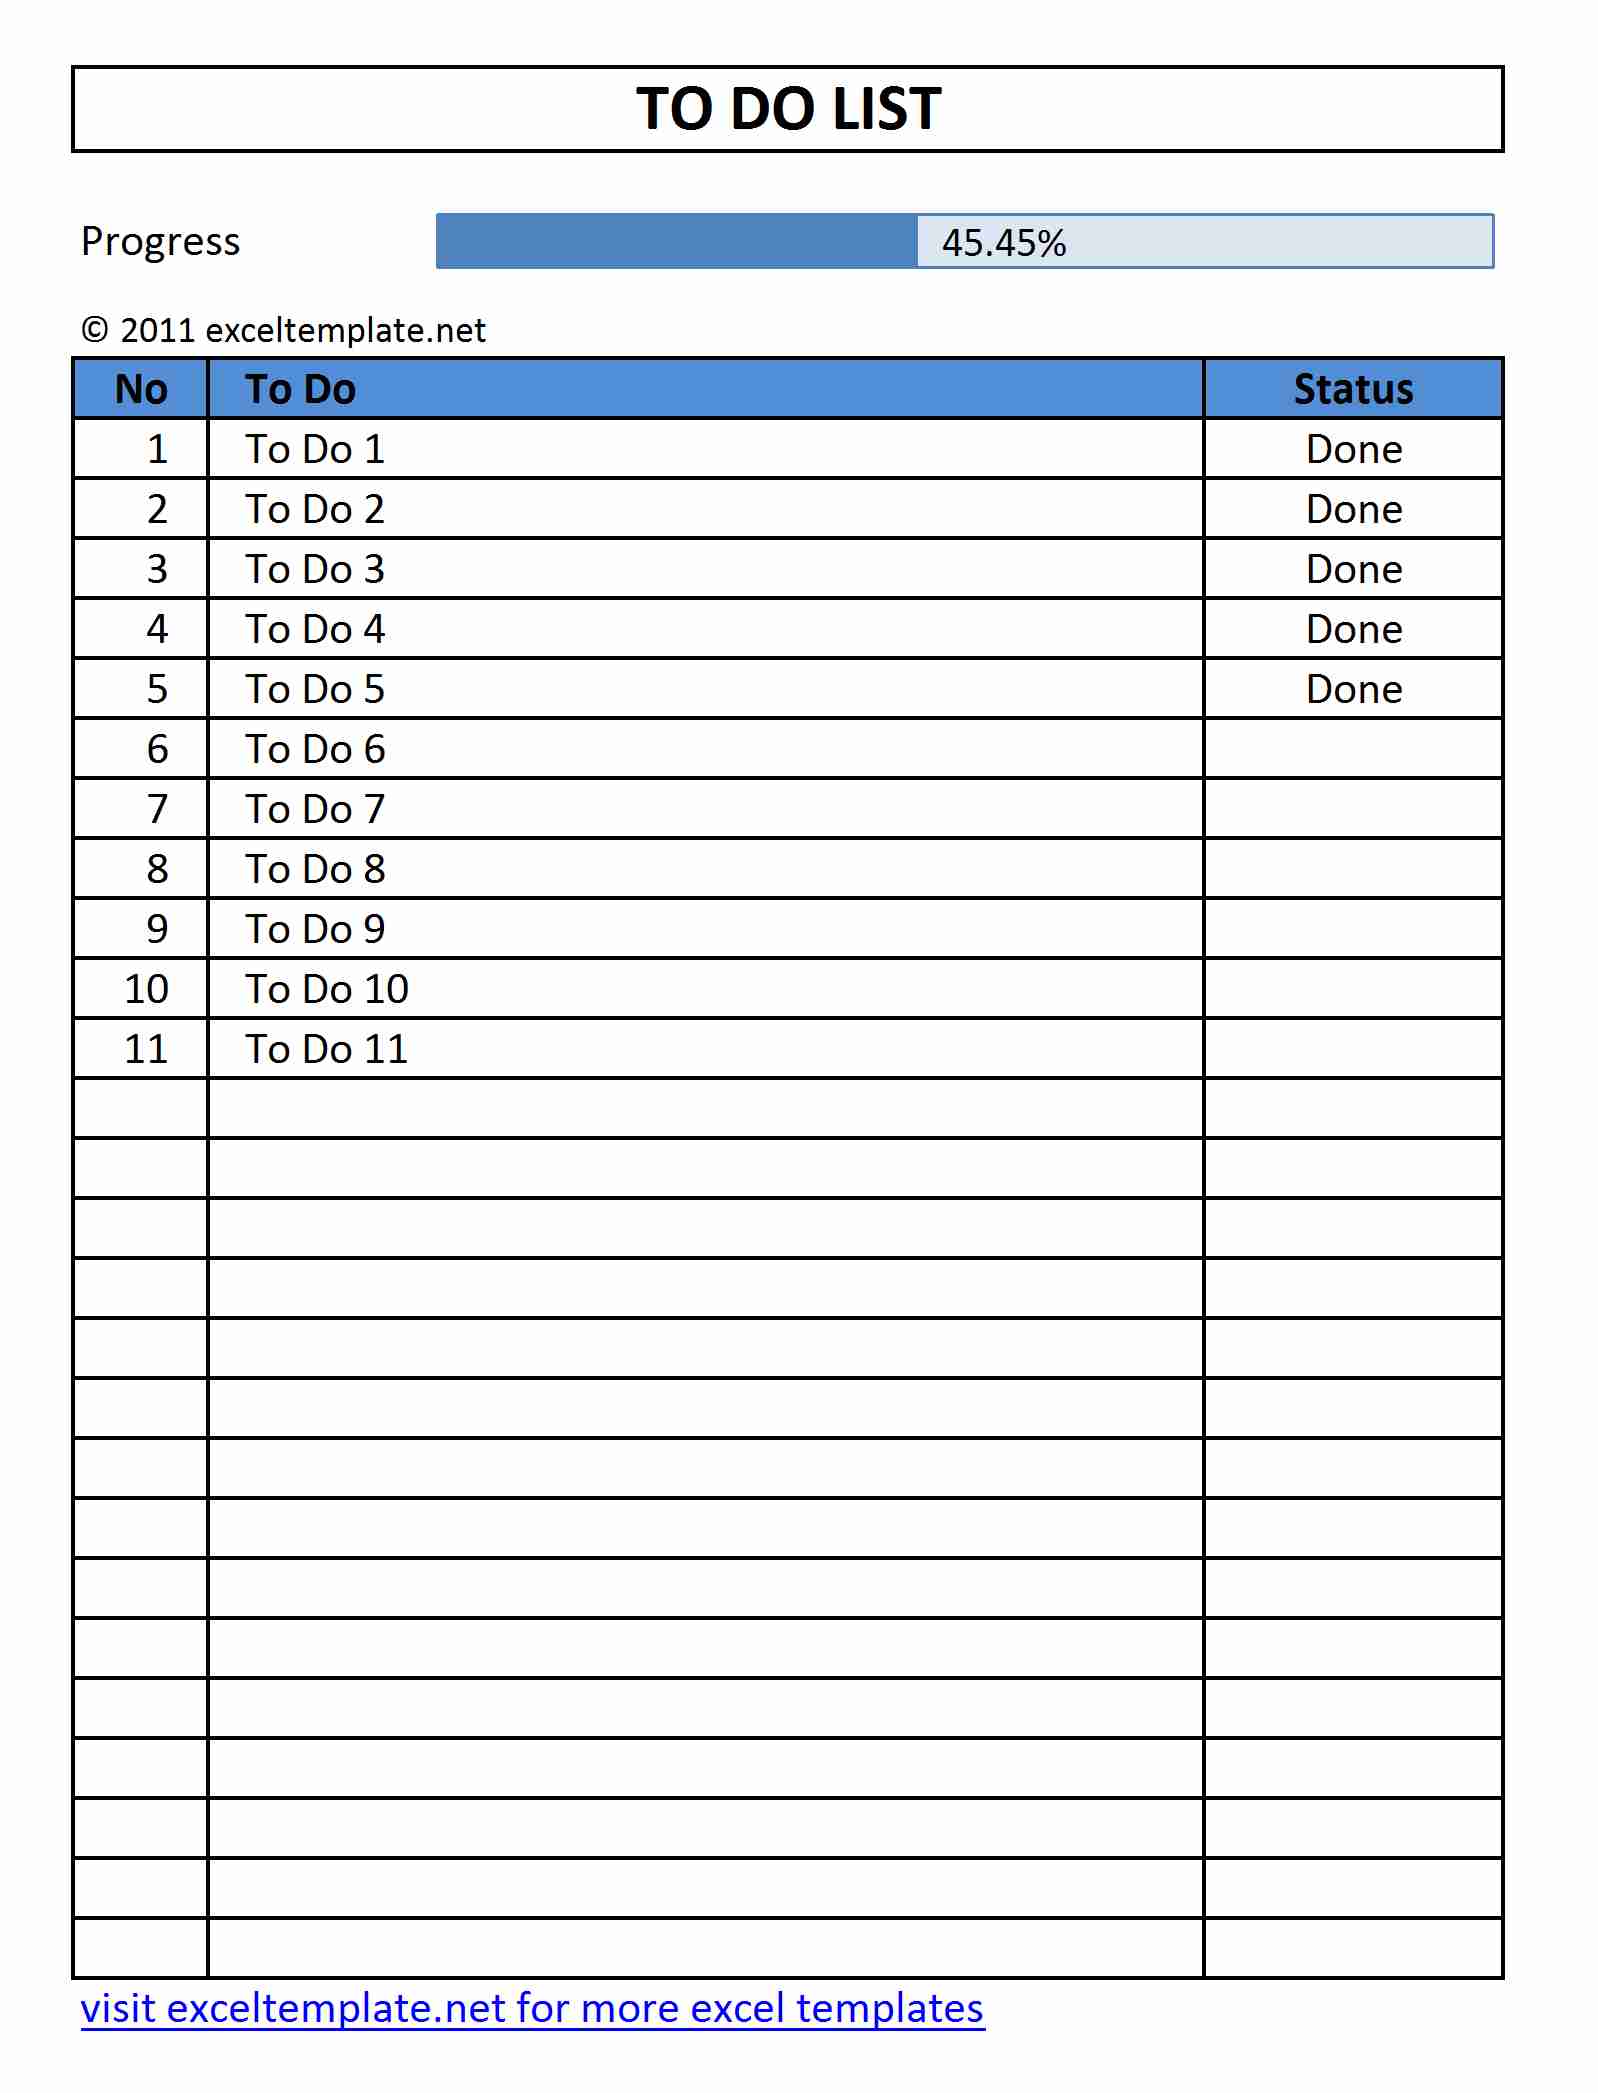 To Do List Template Excel Free